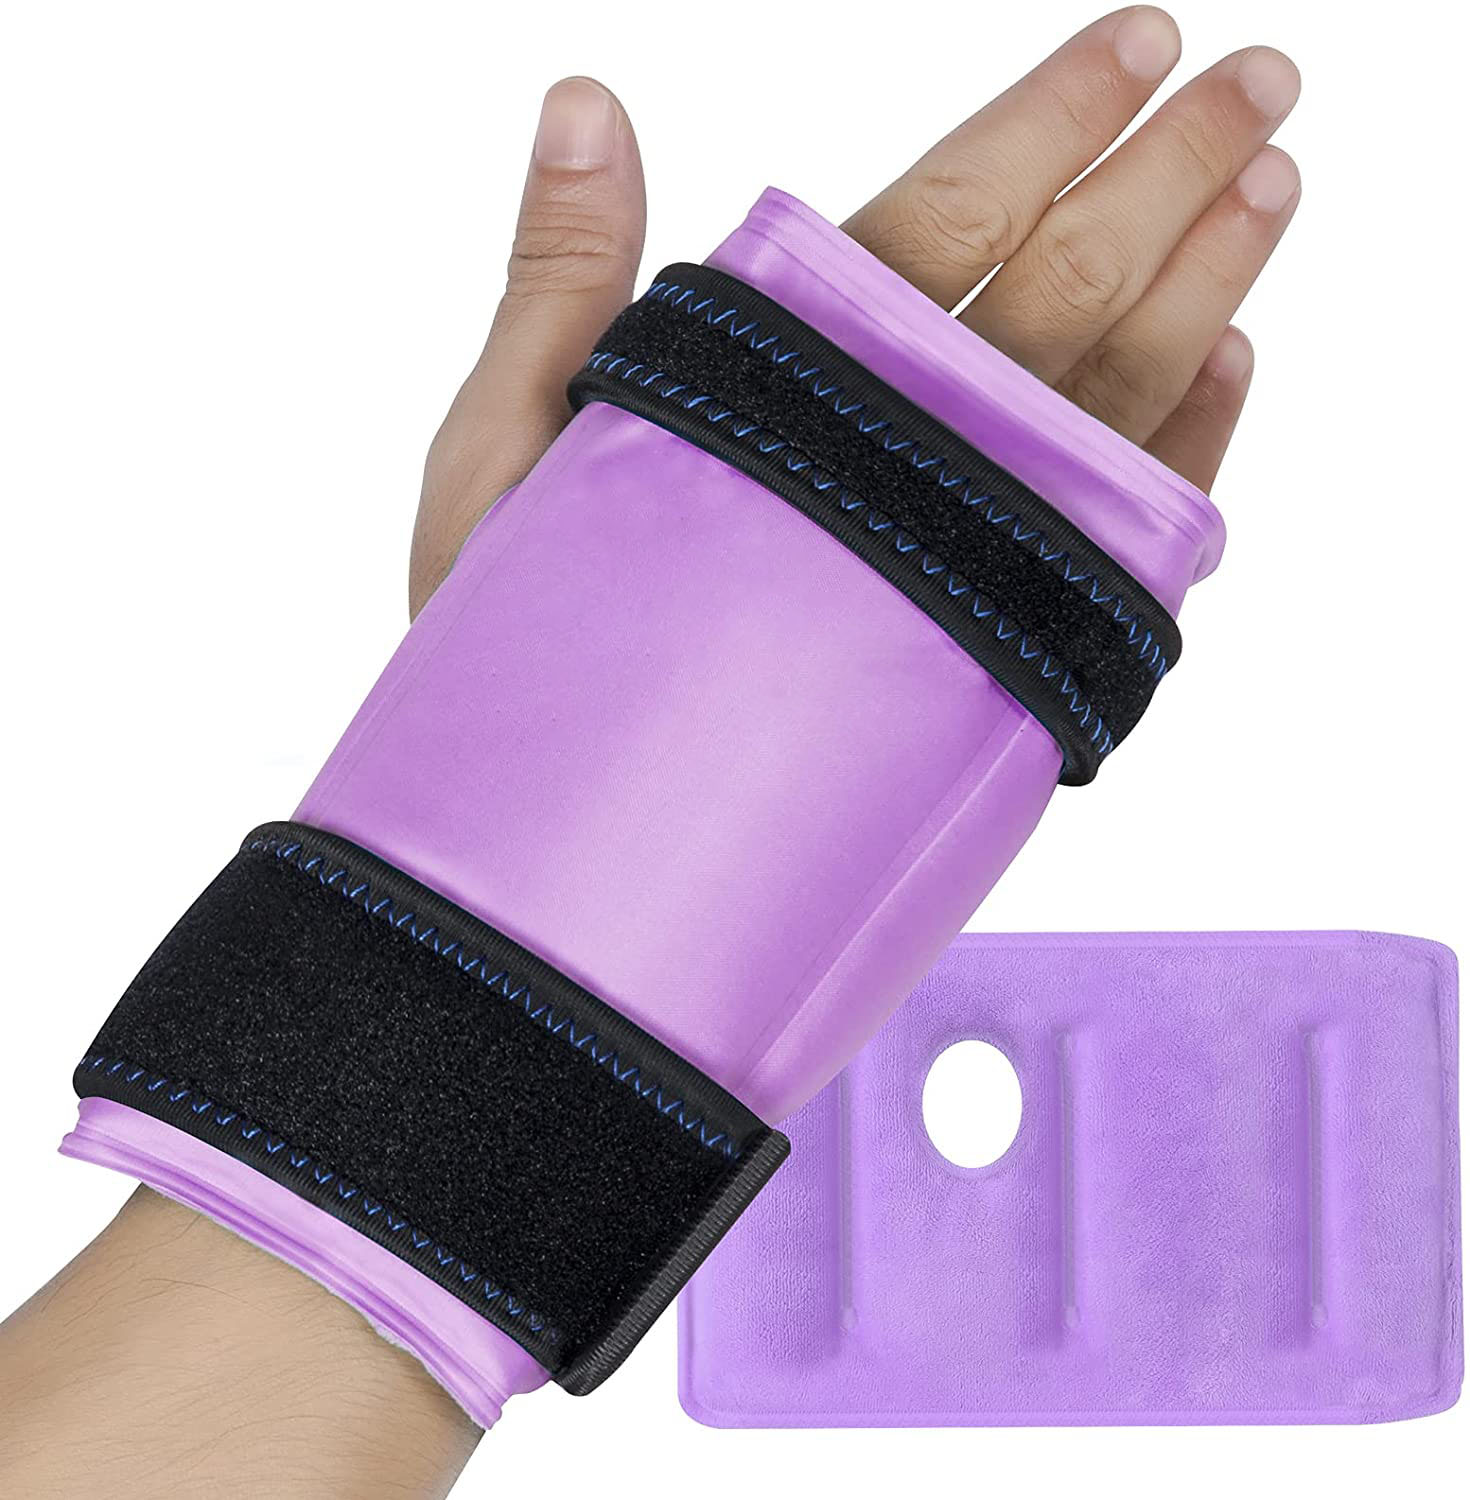 Reusable Gel Hand Ice Pack Wrap for Instant Pain Relief from Carpal Tunnel